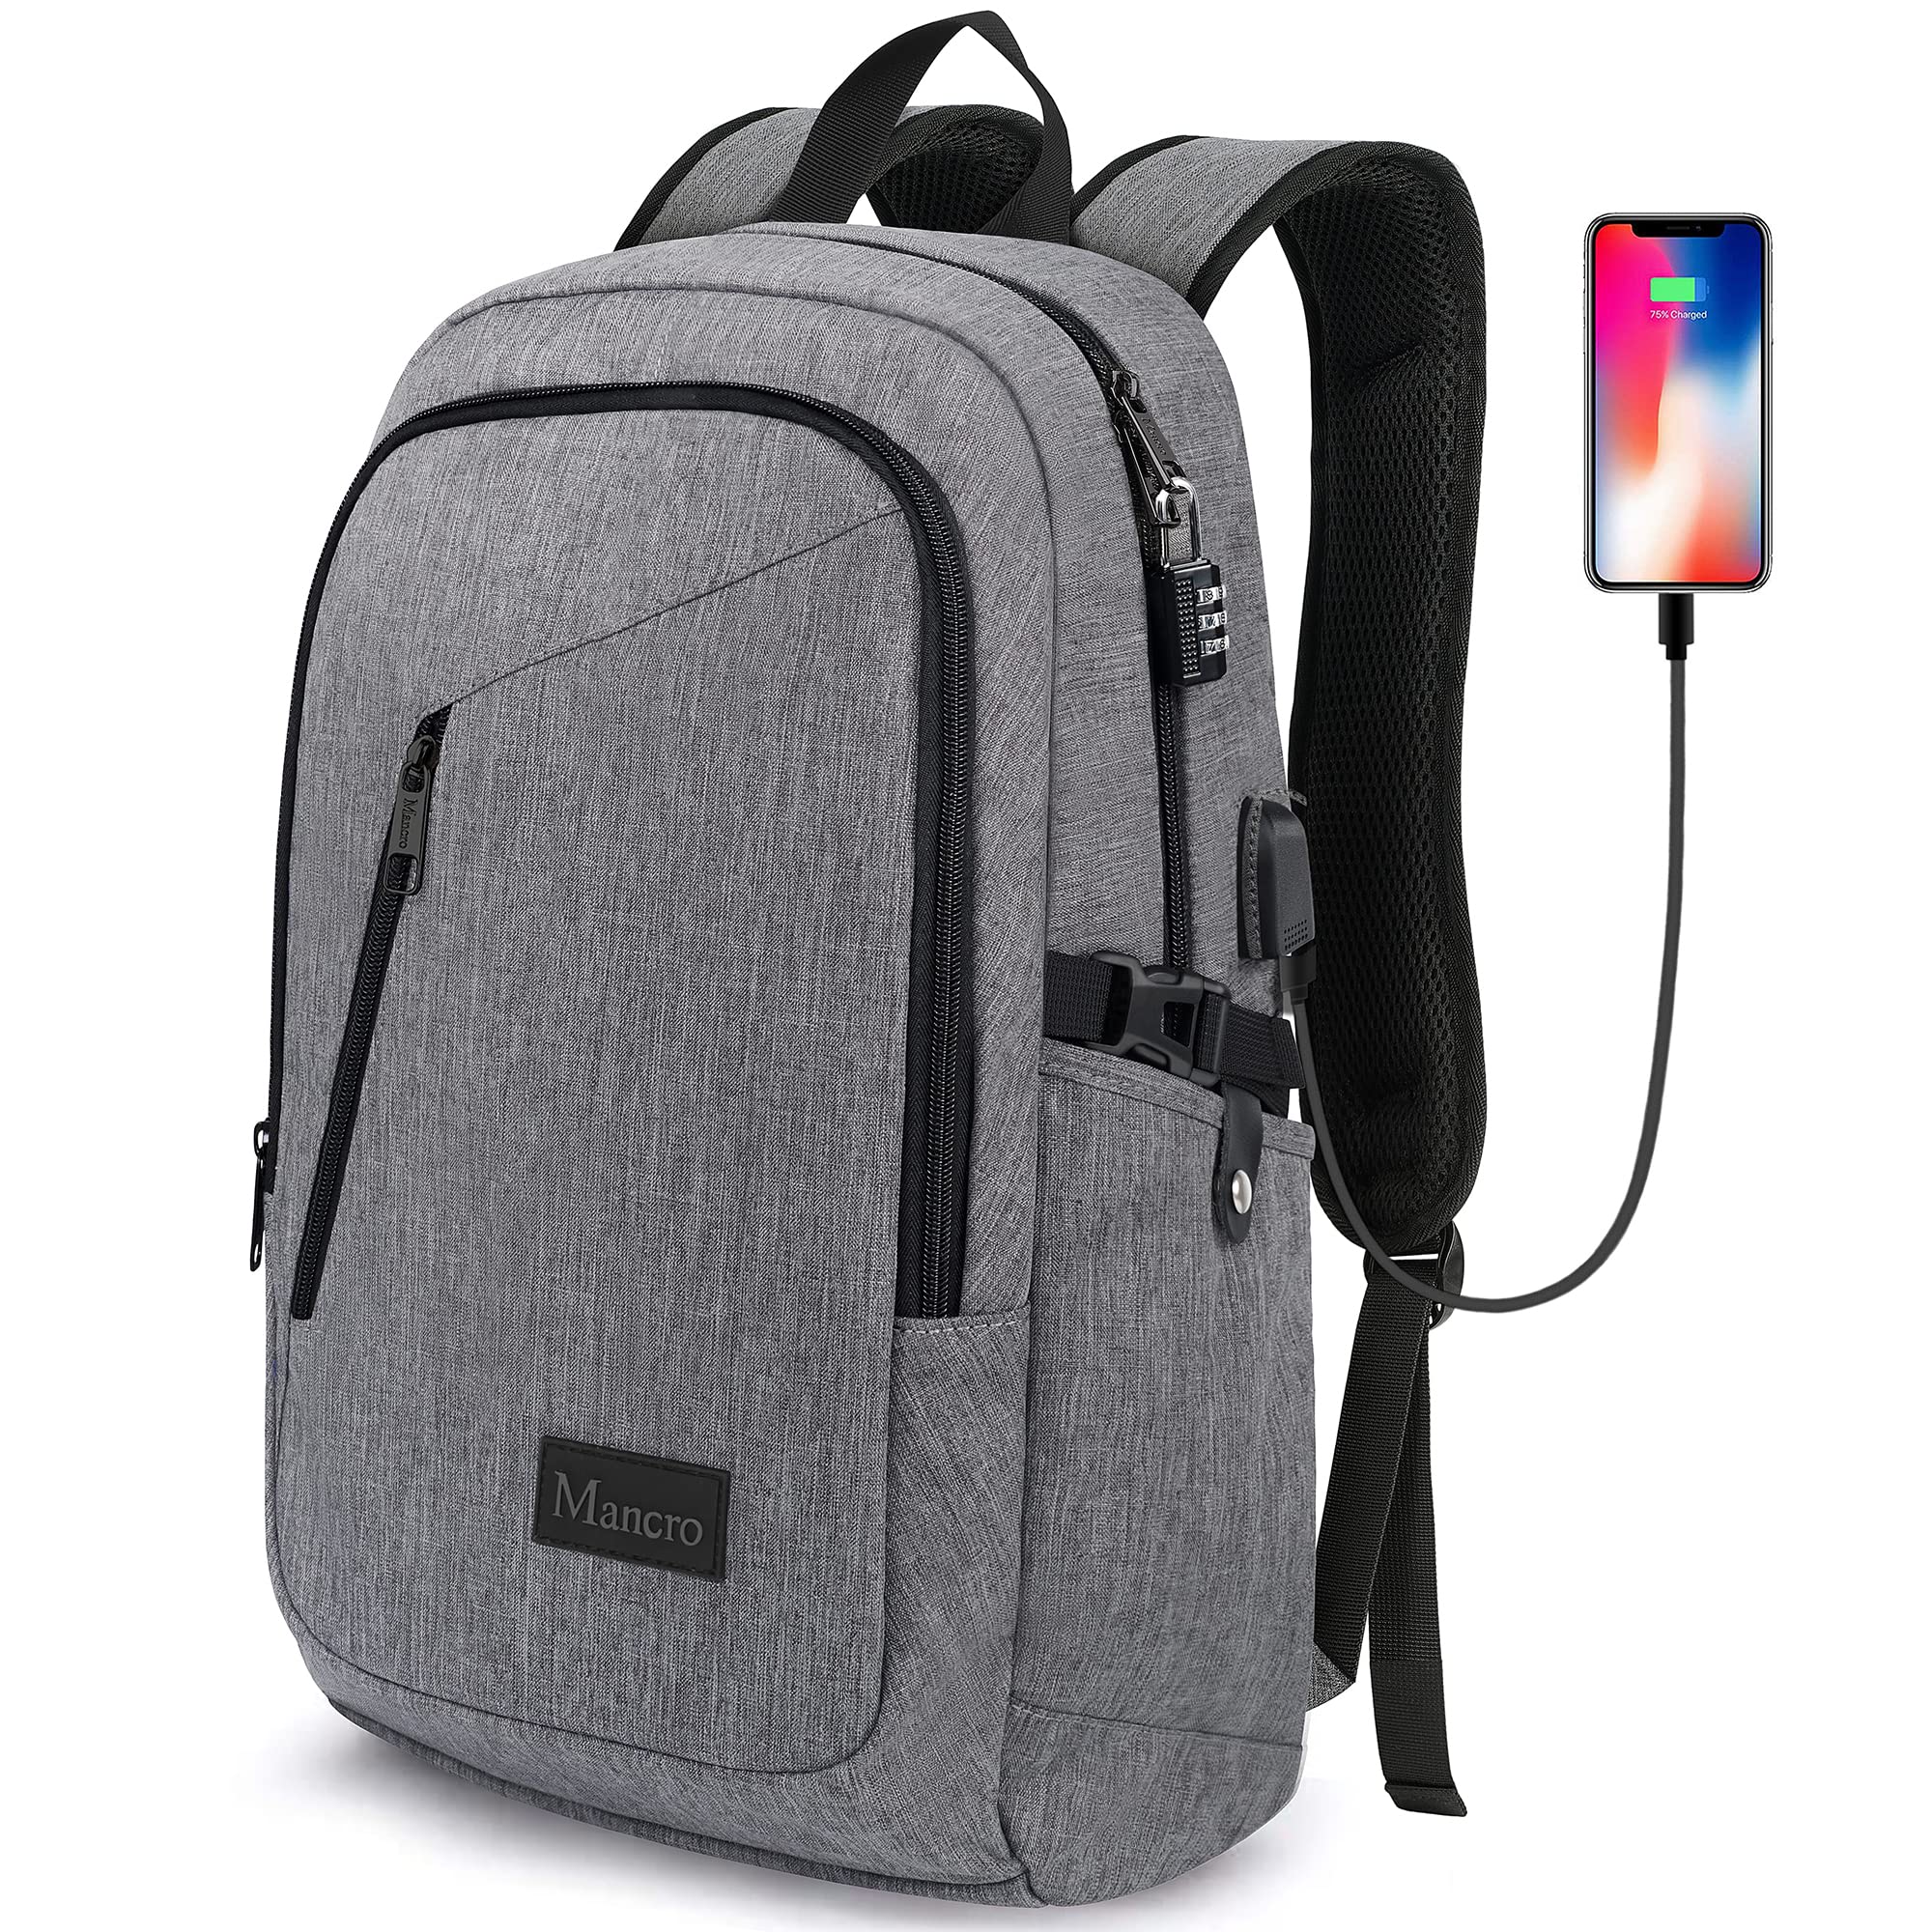 Mancro Laptop Backpack for Travel, 15.6 in Anti-Theft Business Backpack for Men Women with USB Charging Port & Lock, Gifts for Men Women, Water Resistant Travel Computer Bag Daypack, Grey